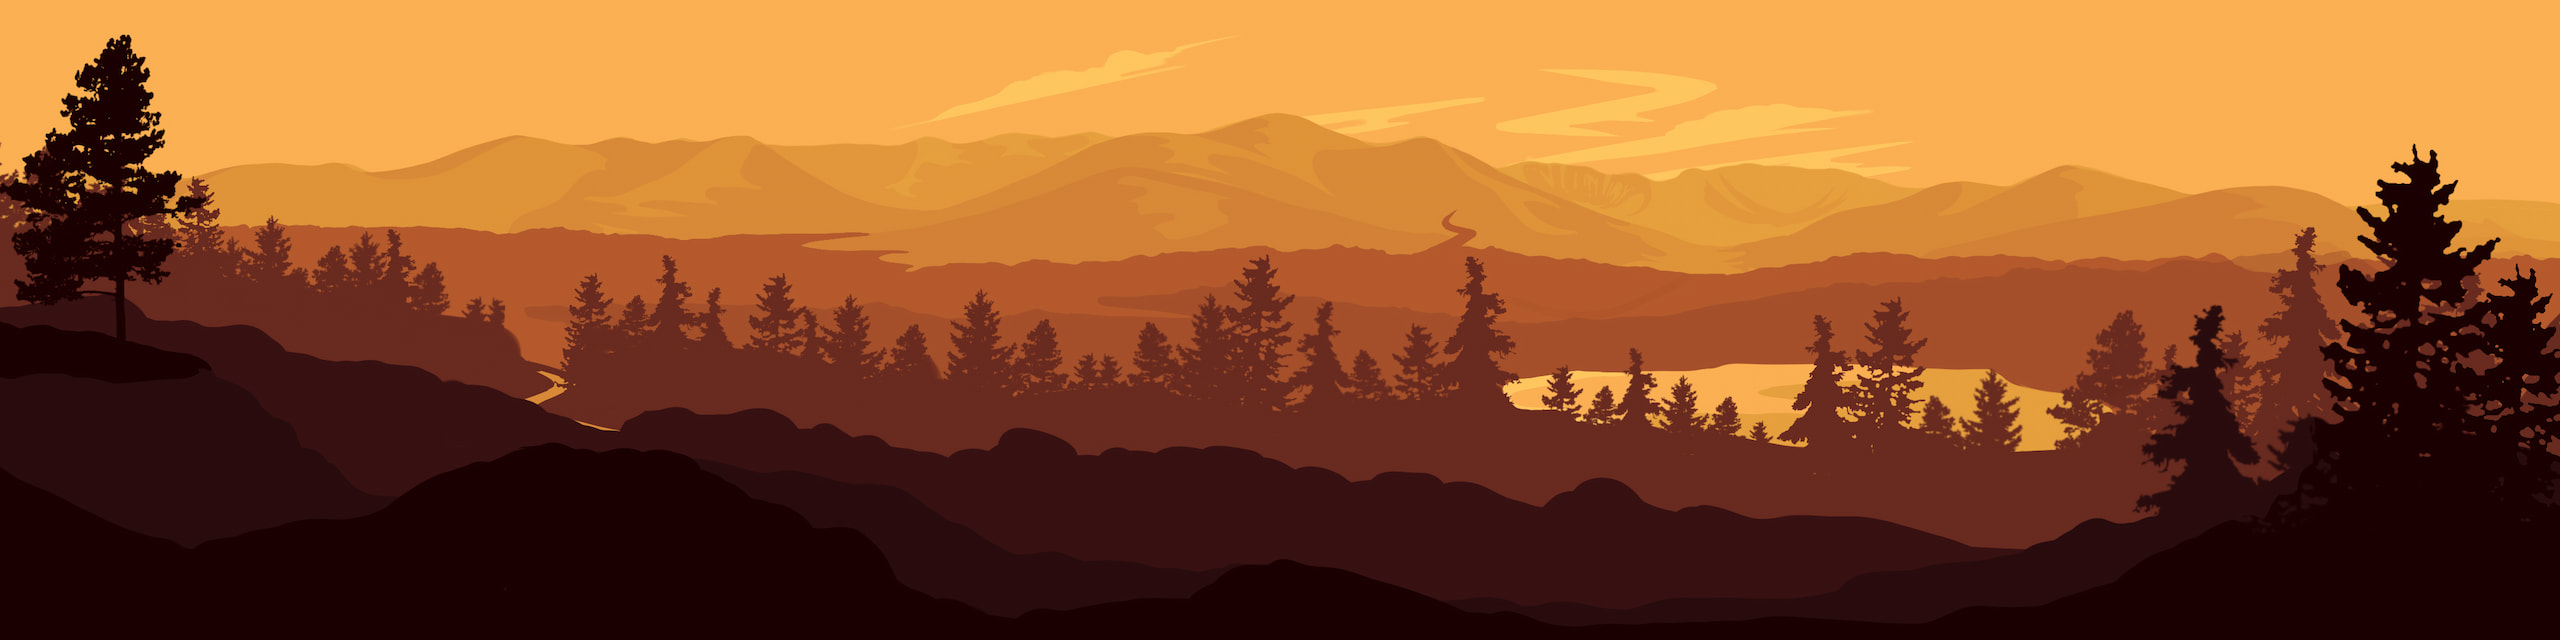 Orange monotone illustration of a landscape. Trees are in the foreground, a loch and forest is in a valley and in the background a mountain range is visible.